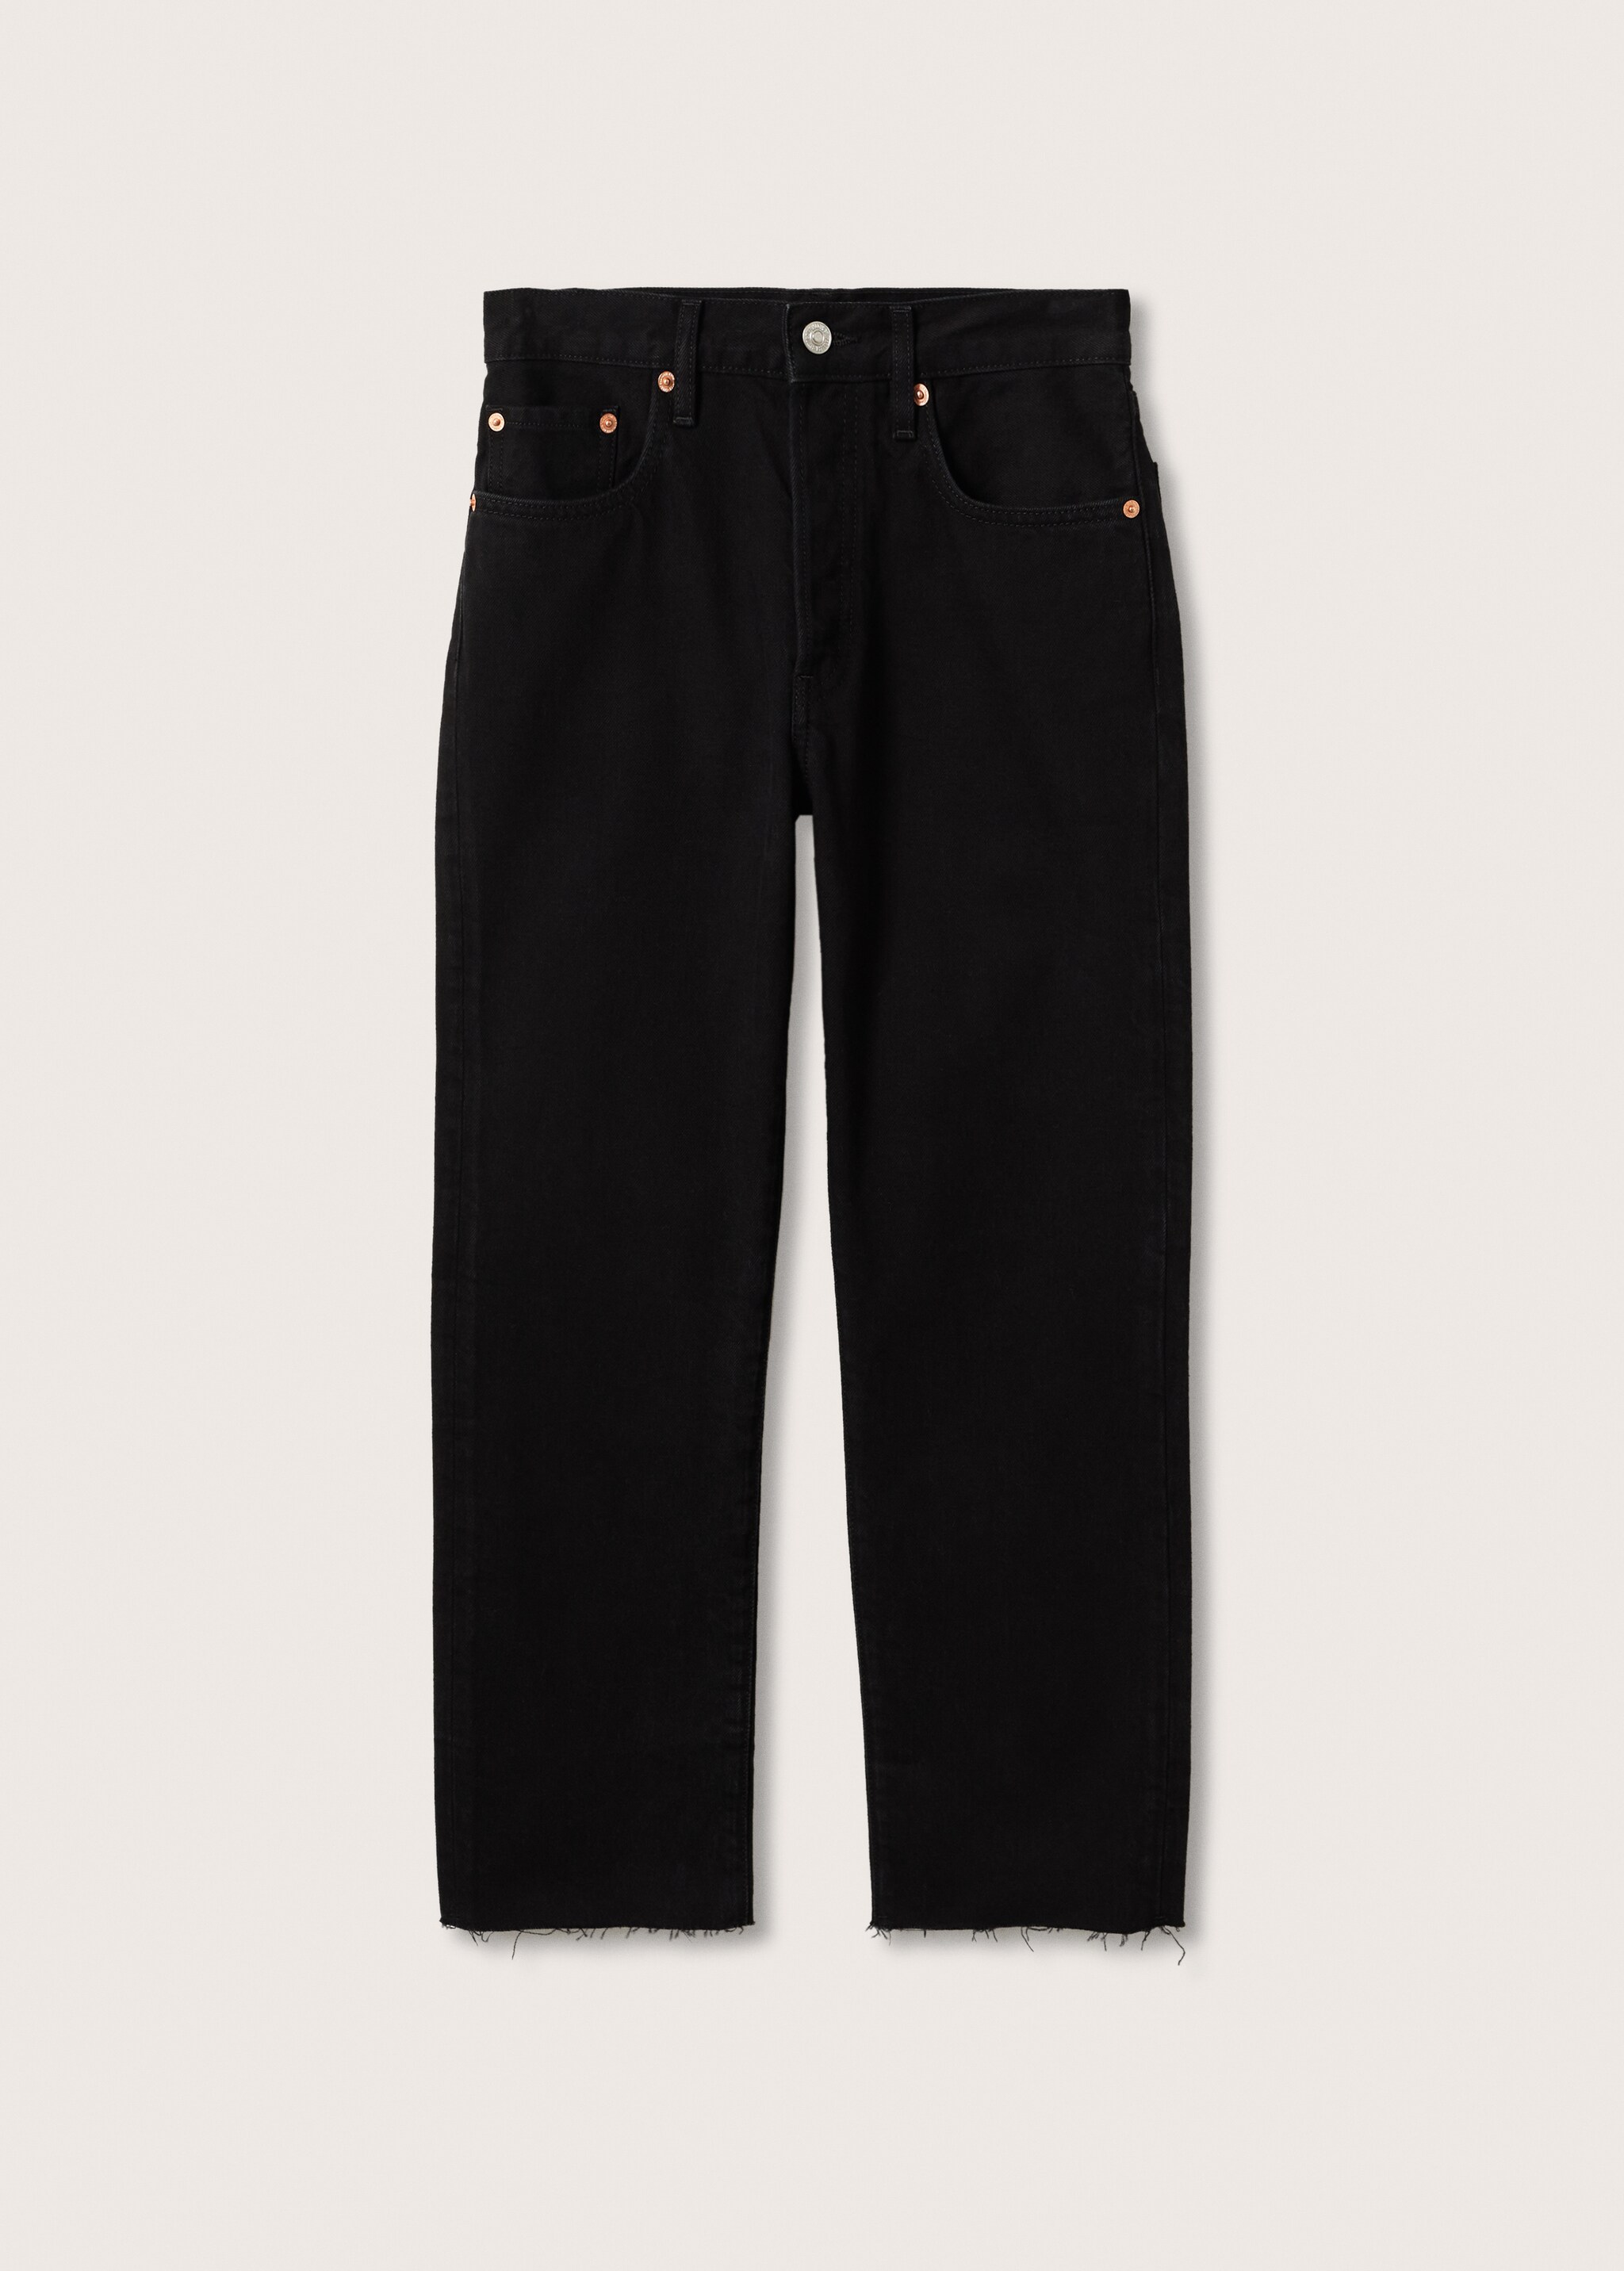 Highwaist straight cropped jeans - Article without model